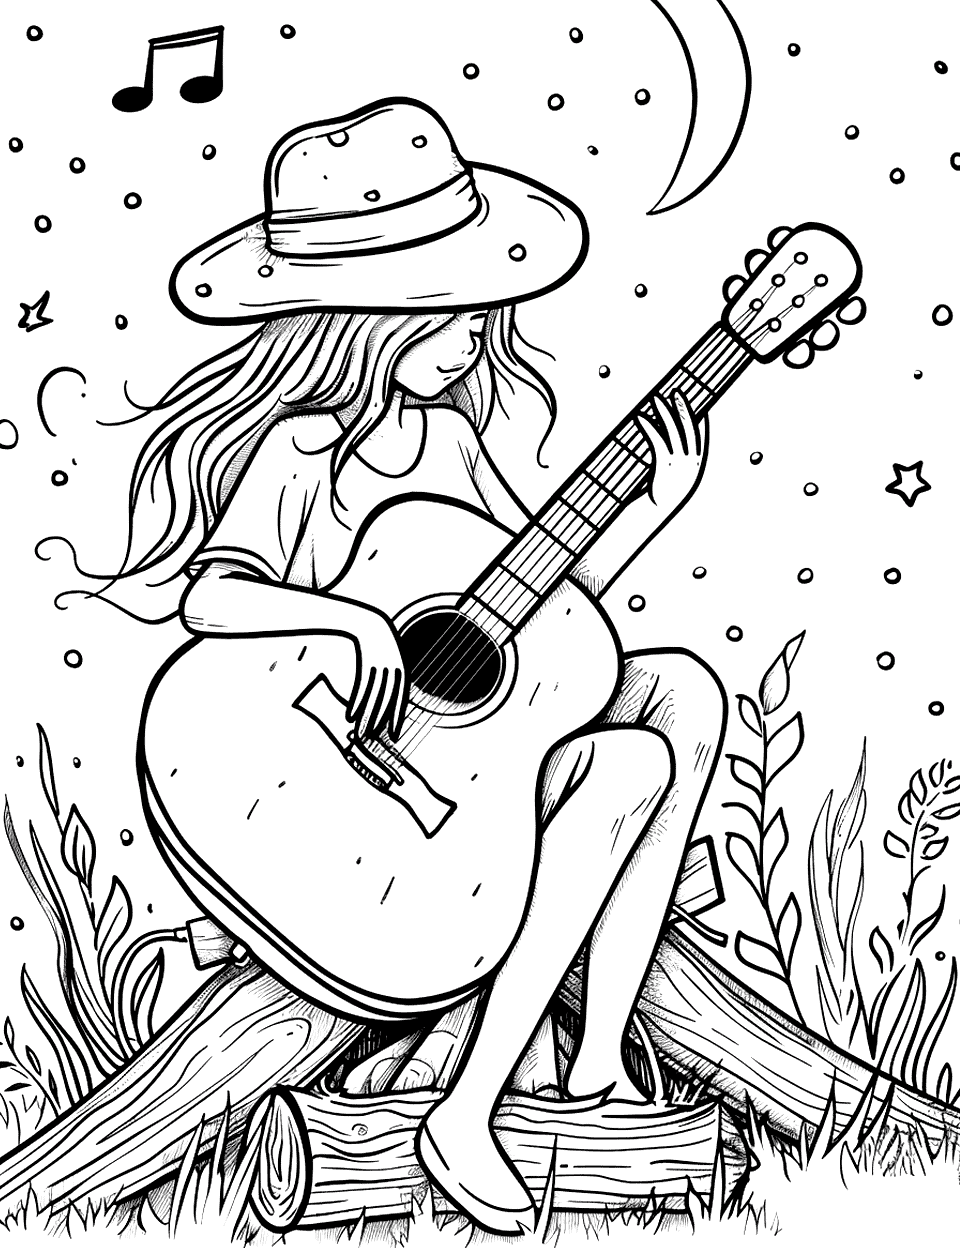 Solo Singer at the Campfire Music Coloring Page - A girl singing with a guitar under the night sky.